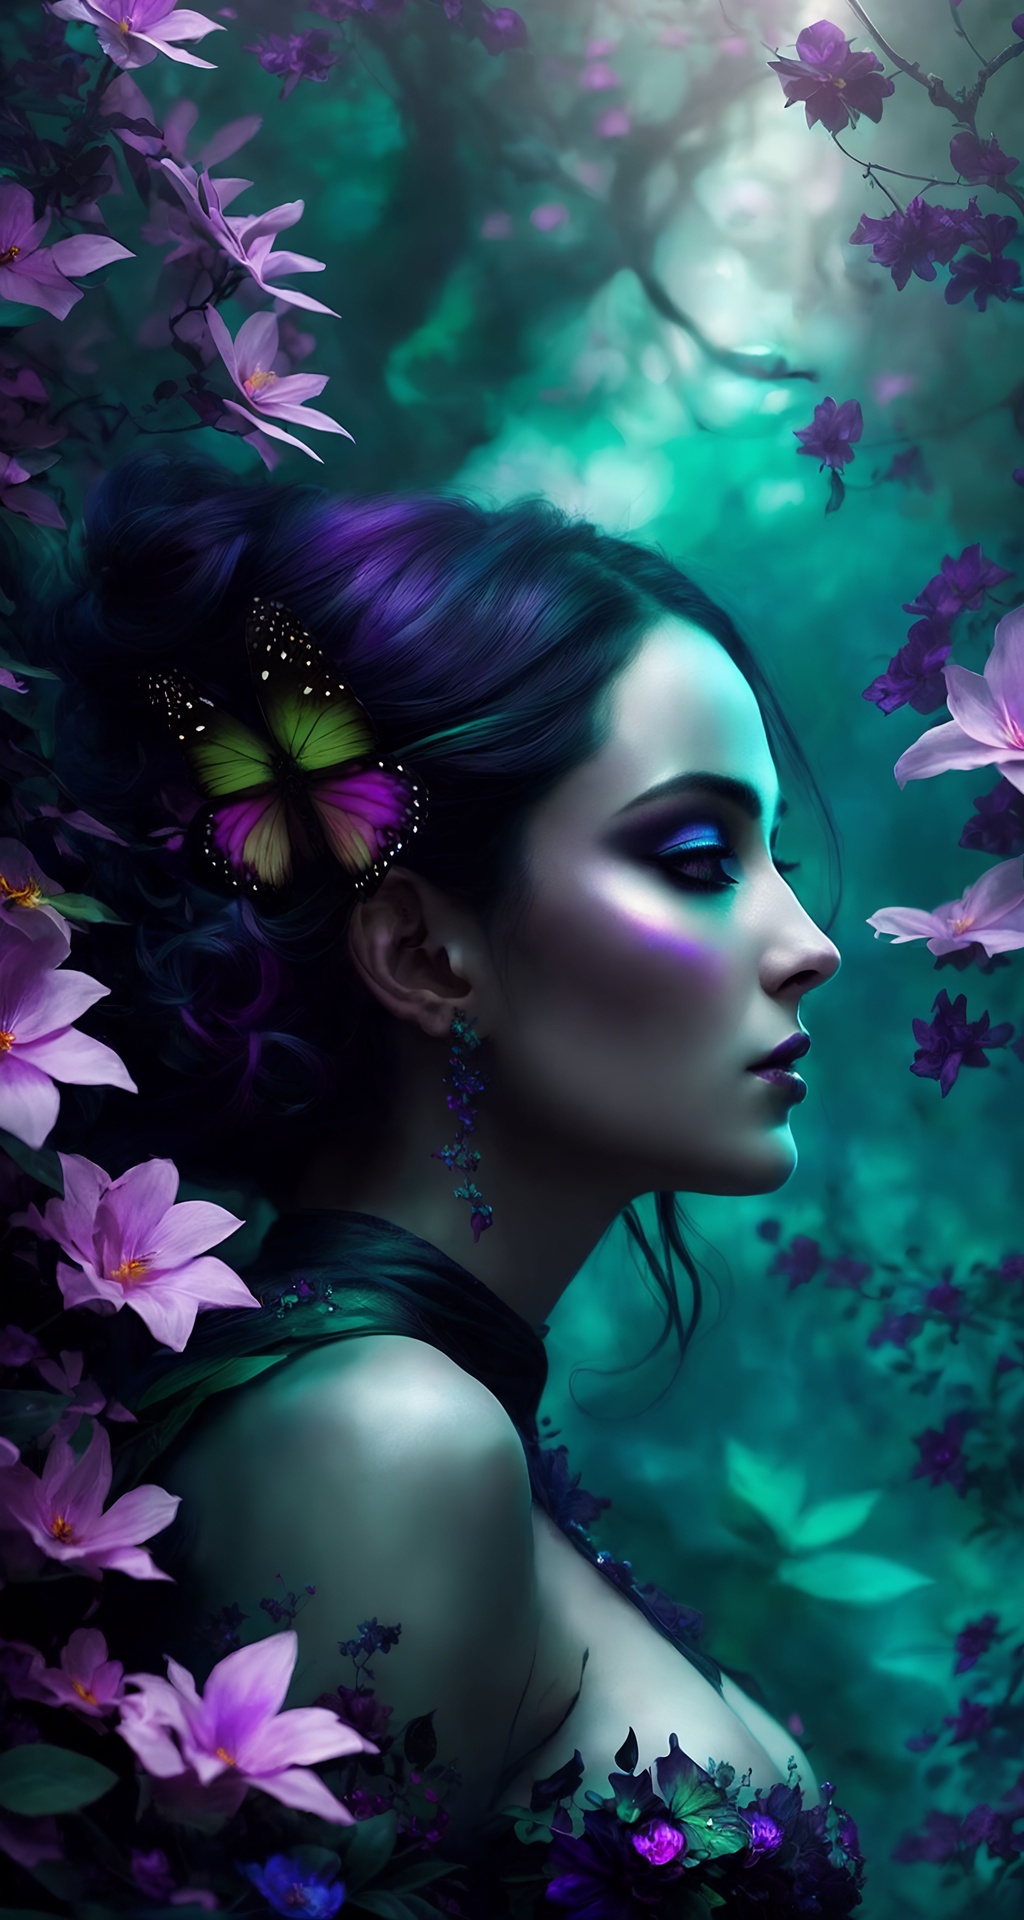 Prompt: ((vibrant)) ((breathtaking)) ((spellbinding)) ((evocative)) ((dramatic)) ((high-quality)) ((suggestive)) ((close-up in-profile portrait digital art)) ((showing chest)) ((by Esao Andrews, Julie Bell, and Julie Dillon)), featuring a ((captivating)) scene where a ((whimsical)) ((ethereal)) creature gracefully dances on the edge of a ((mysterious)) floating island surrounded by swirling colorful skies, enigmatic creature, ((part-human)), ((part-faerie)), exudes an aura of ((enchantment ))and ((dark allure)), ((delicate)) iridescent, shimmer with magical energy, lush verdant foliage and ((exotic)) luminescent flowers that cover the island, evokes a sense of wonder, tinge of ((darkness)), hidden secrets, ((fantastical)) world, ((High detail)), ((UHD)) ((4k)), blending unique styles to create a mesmerizing and unforgettable image.